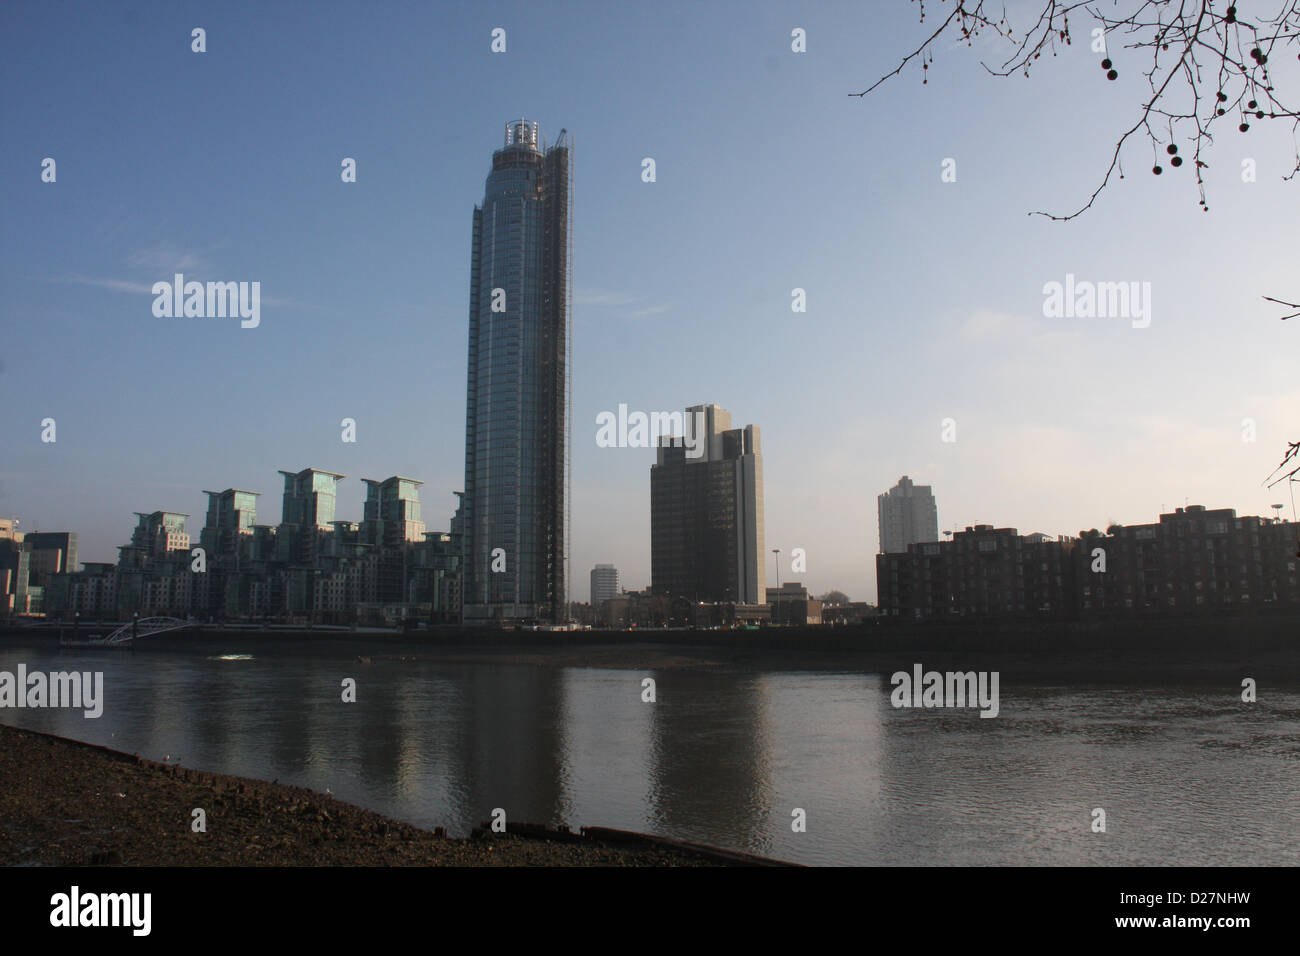 St Georges Wharf, Vauxhall, London UK  16th January 2013. A comparative view of the sky line around St.Georges Wharf, Vauxhall.  Credit:  Bruce Bennett / Alamy Live News Stock Photo